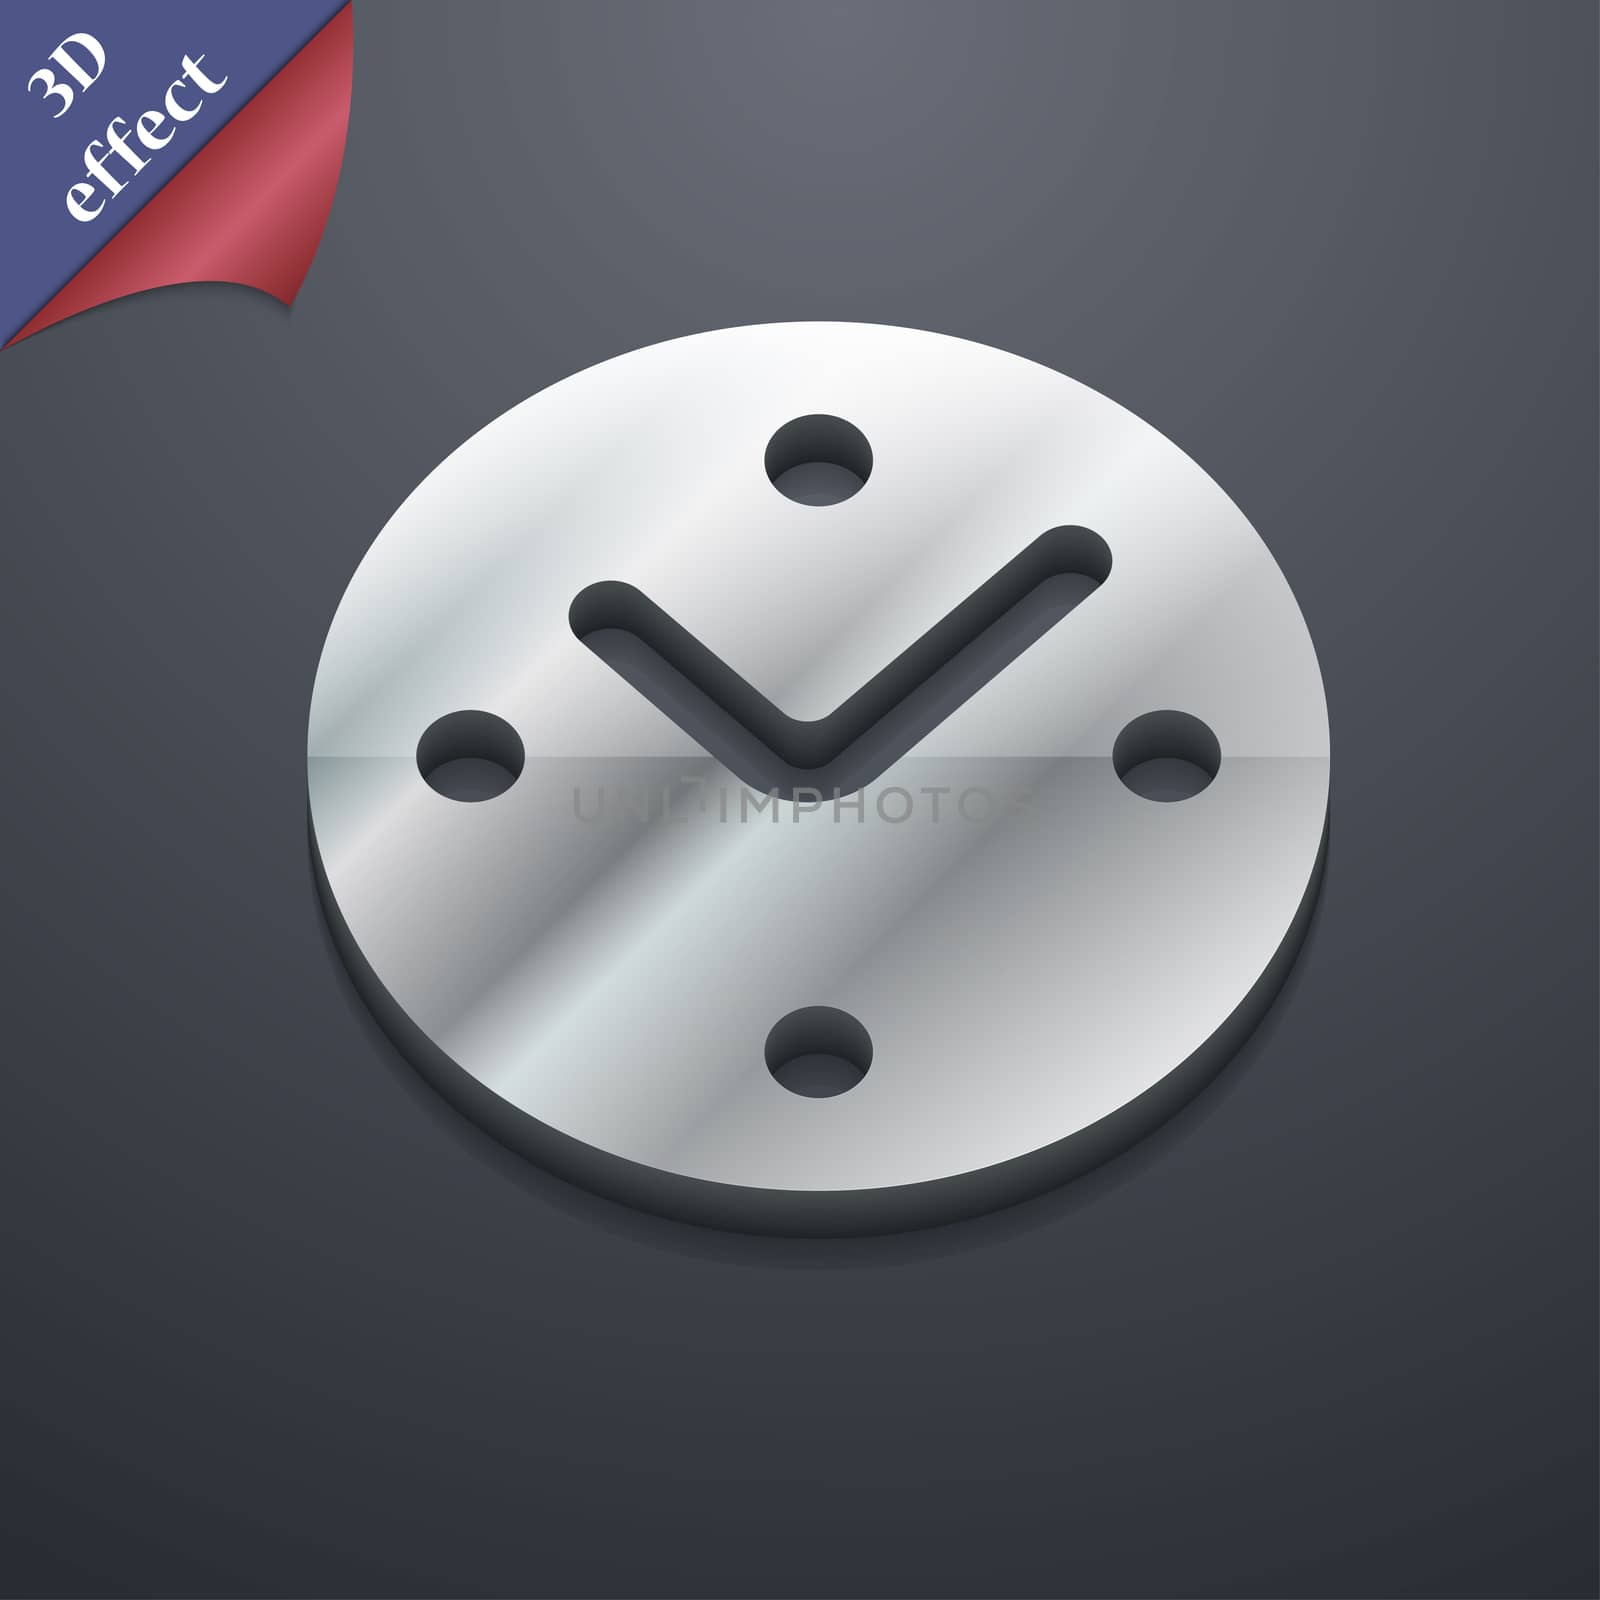 Mechanical Clock icon symbol. 3D style. Trendy, modern design with space for your text illustration. Rastrized copy